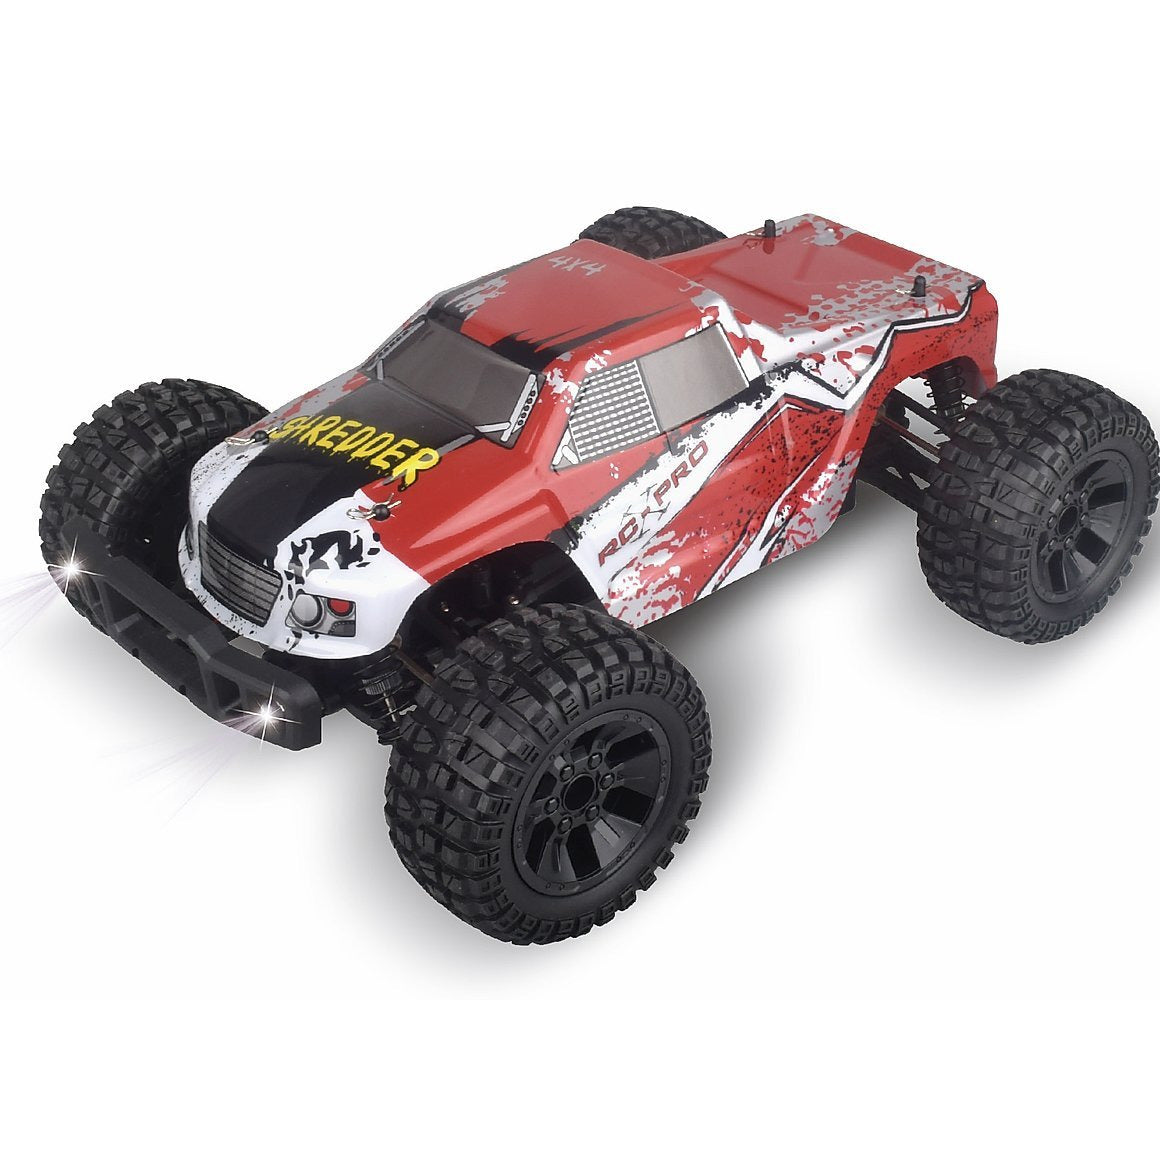 Shredder 4WD 1/12 Brushed Monster Truck RTR by RC-Pro